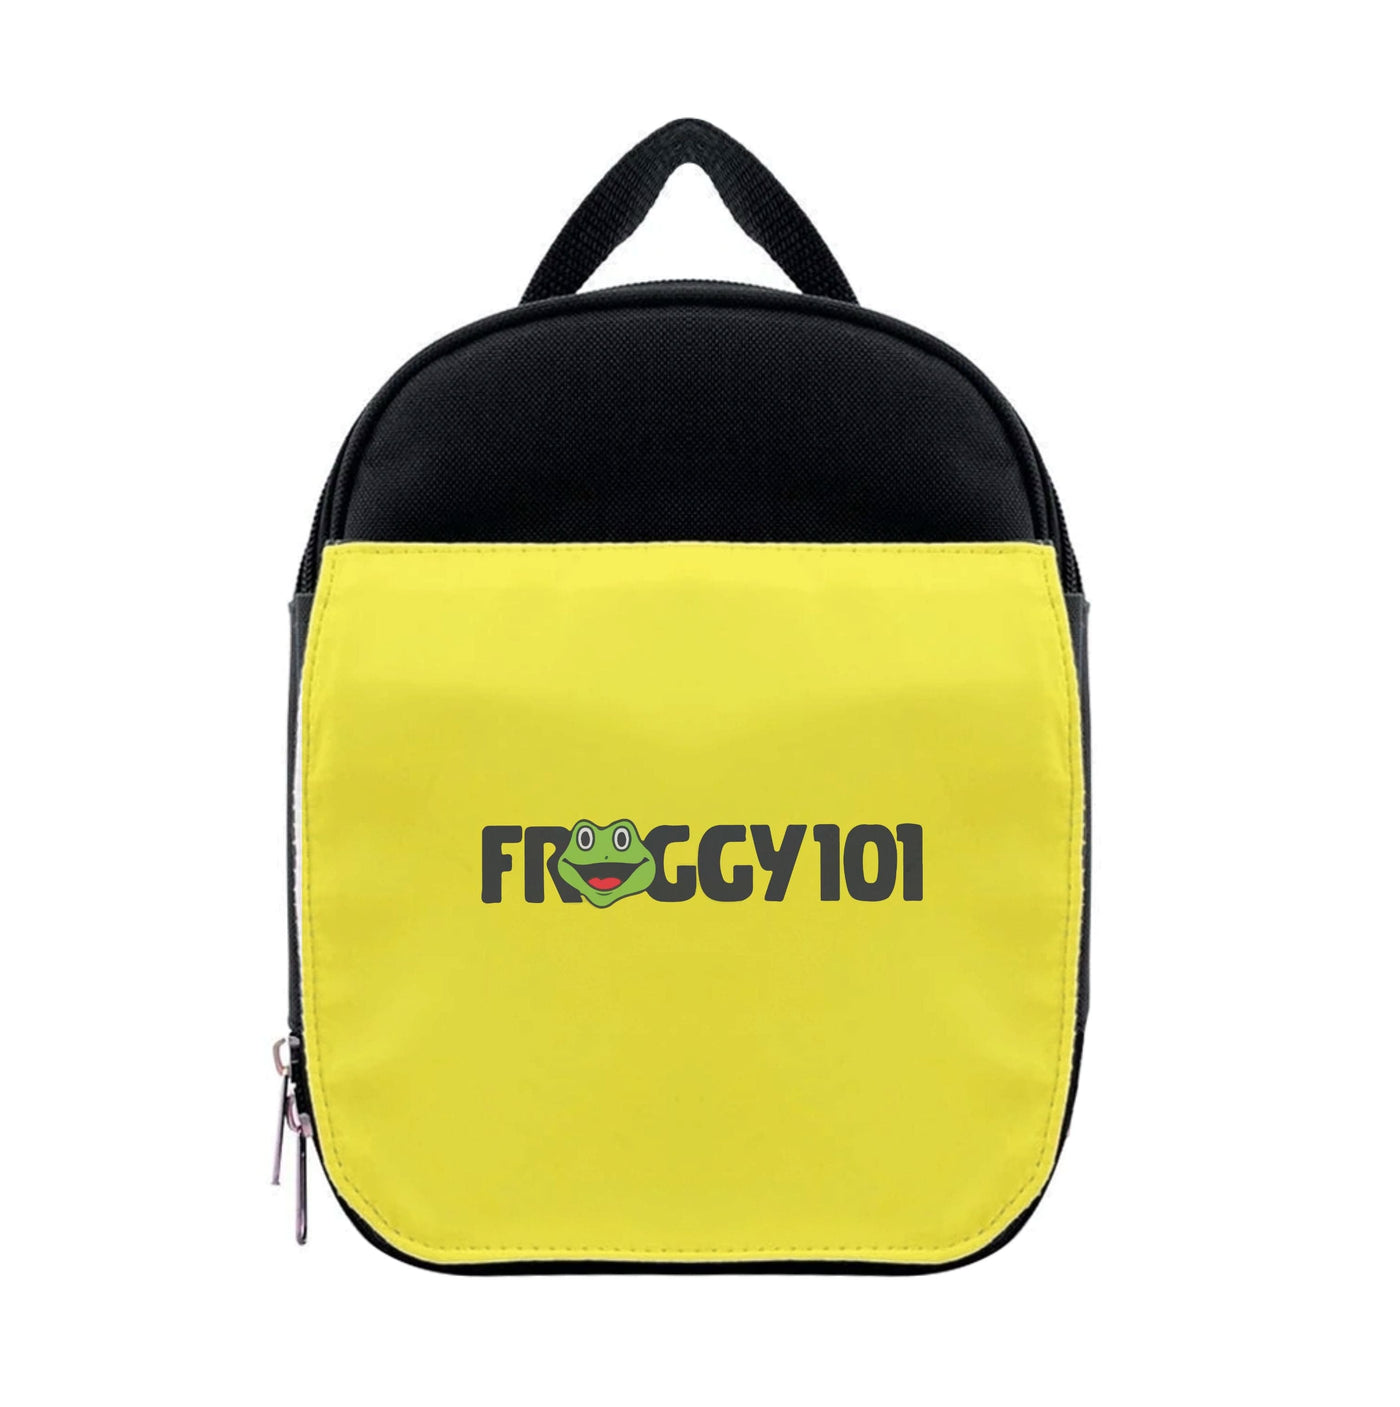 Froggy 101 - The Office Lunchbox